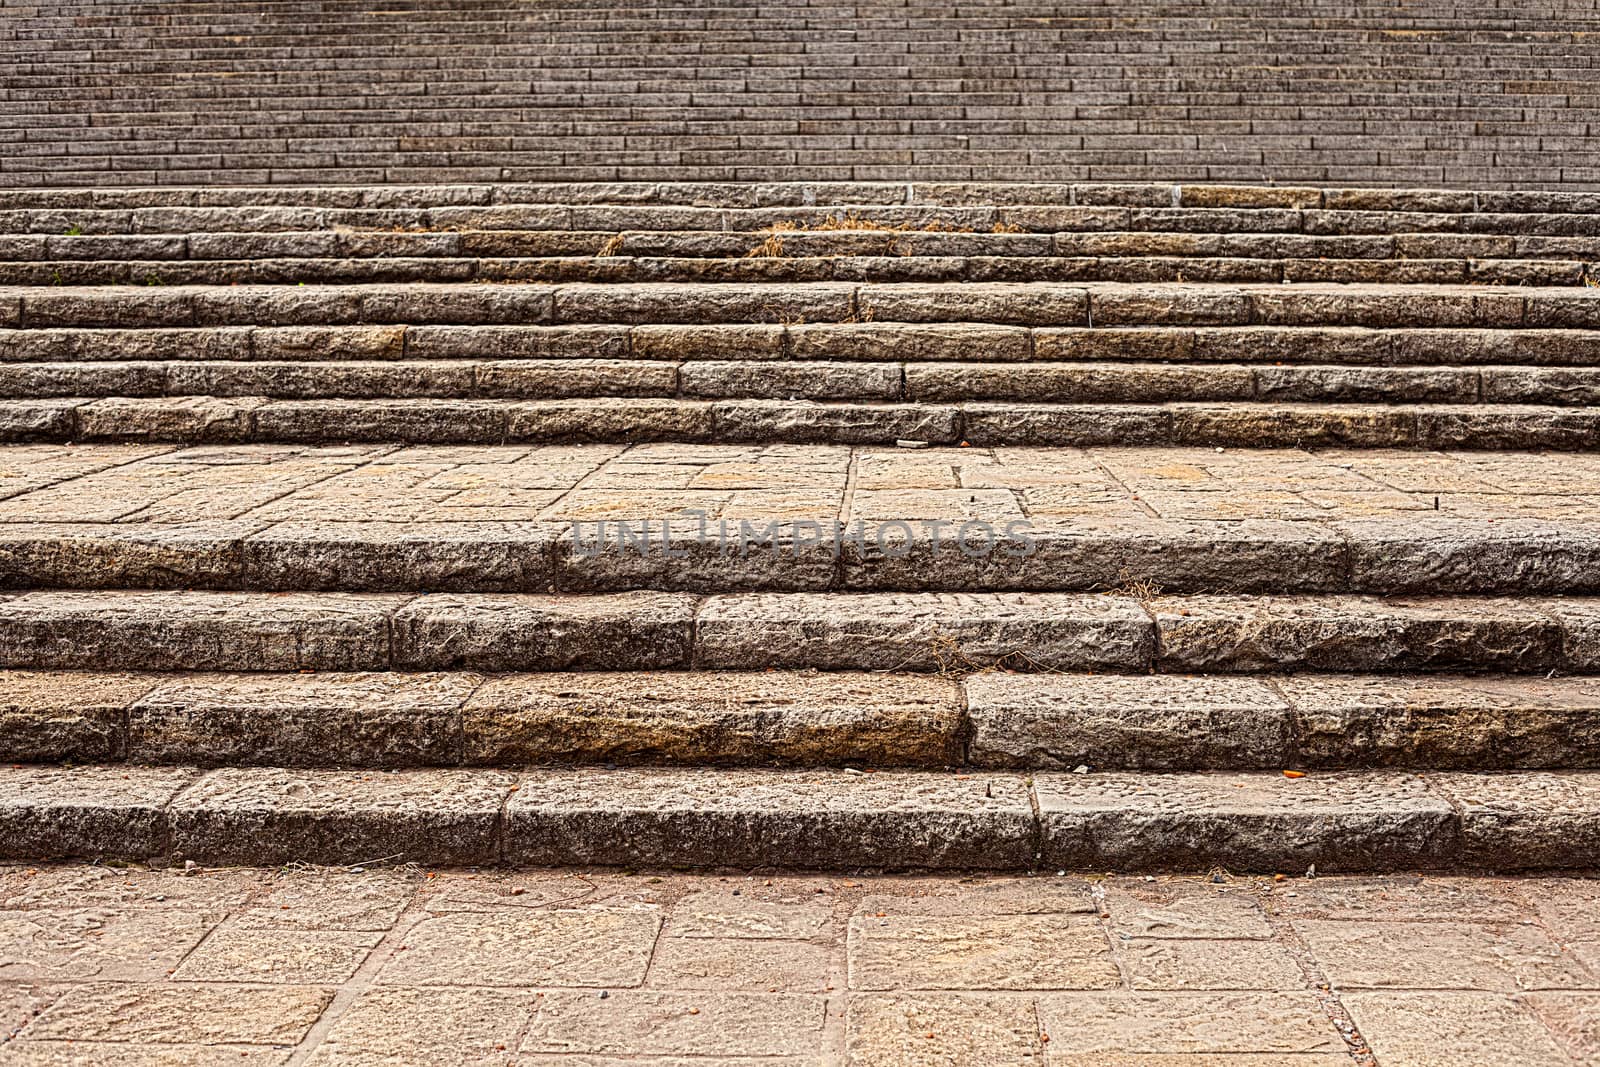 stone staircase of an old building